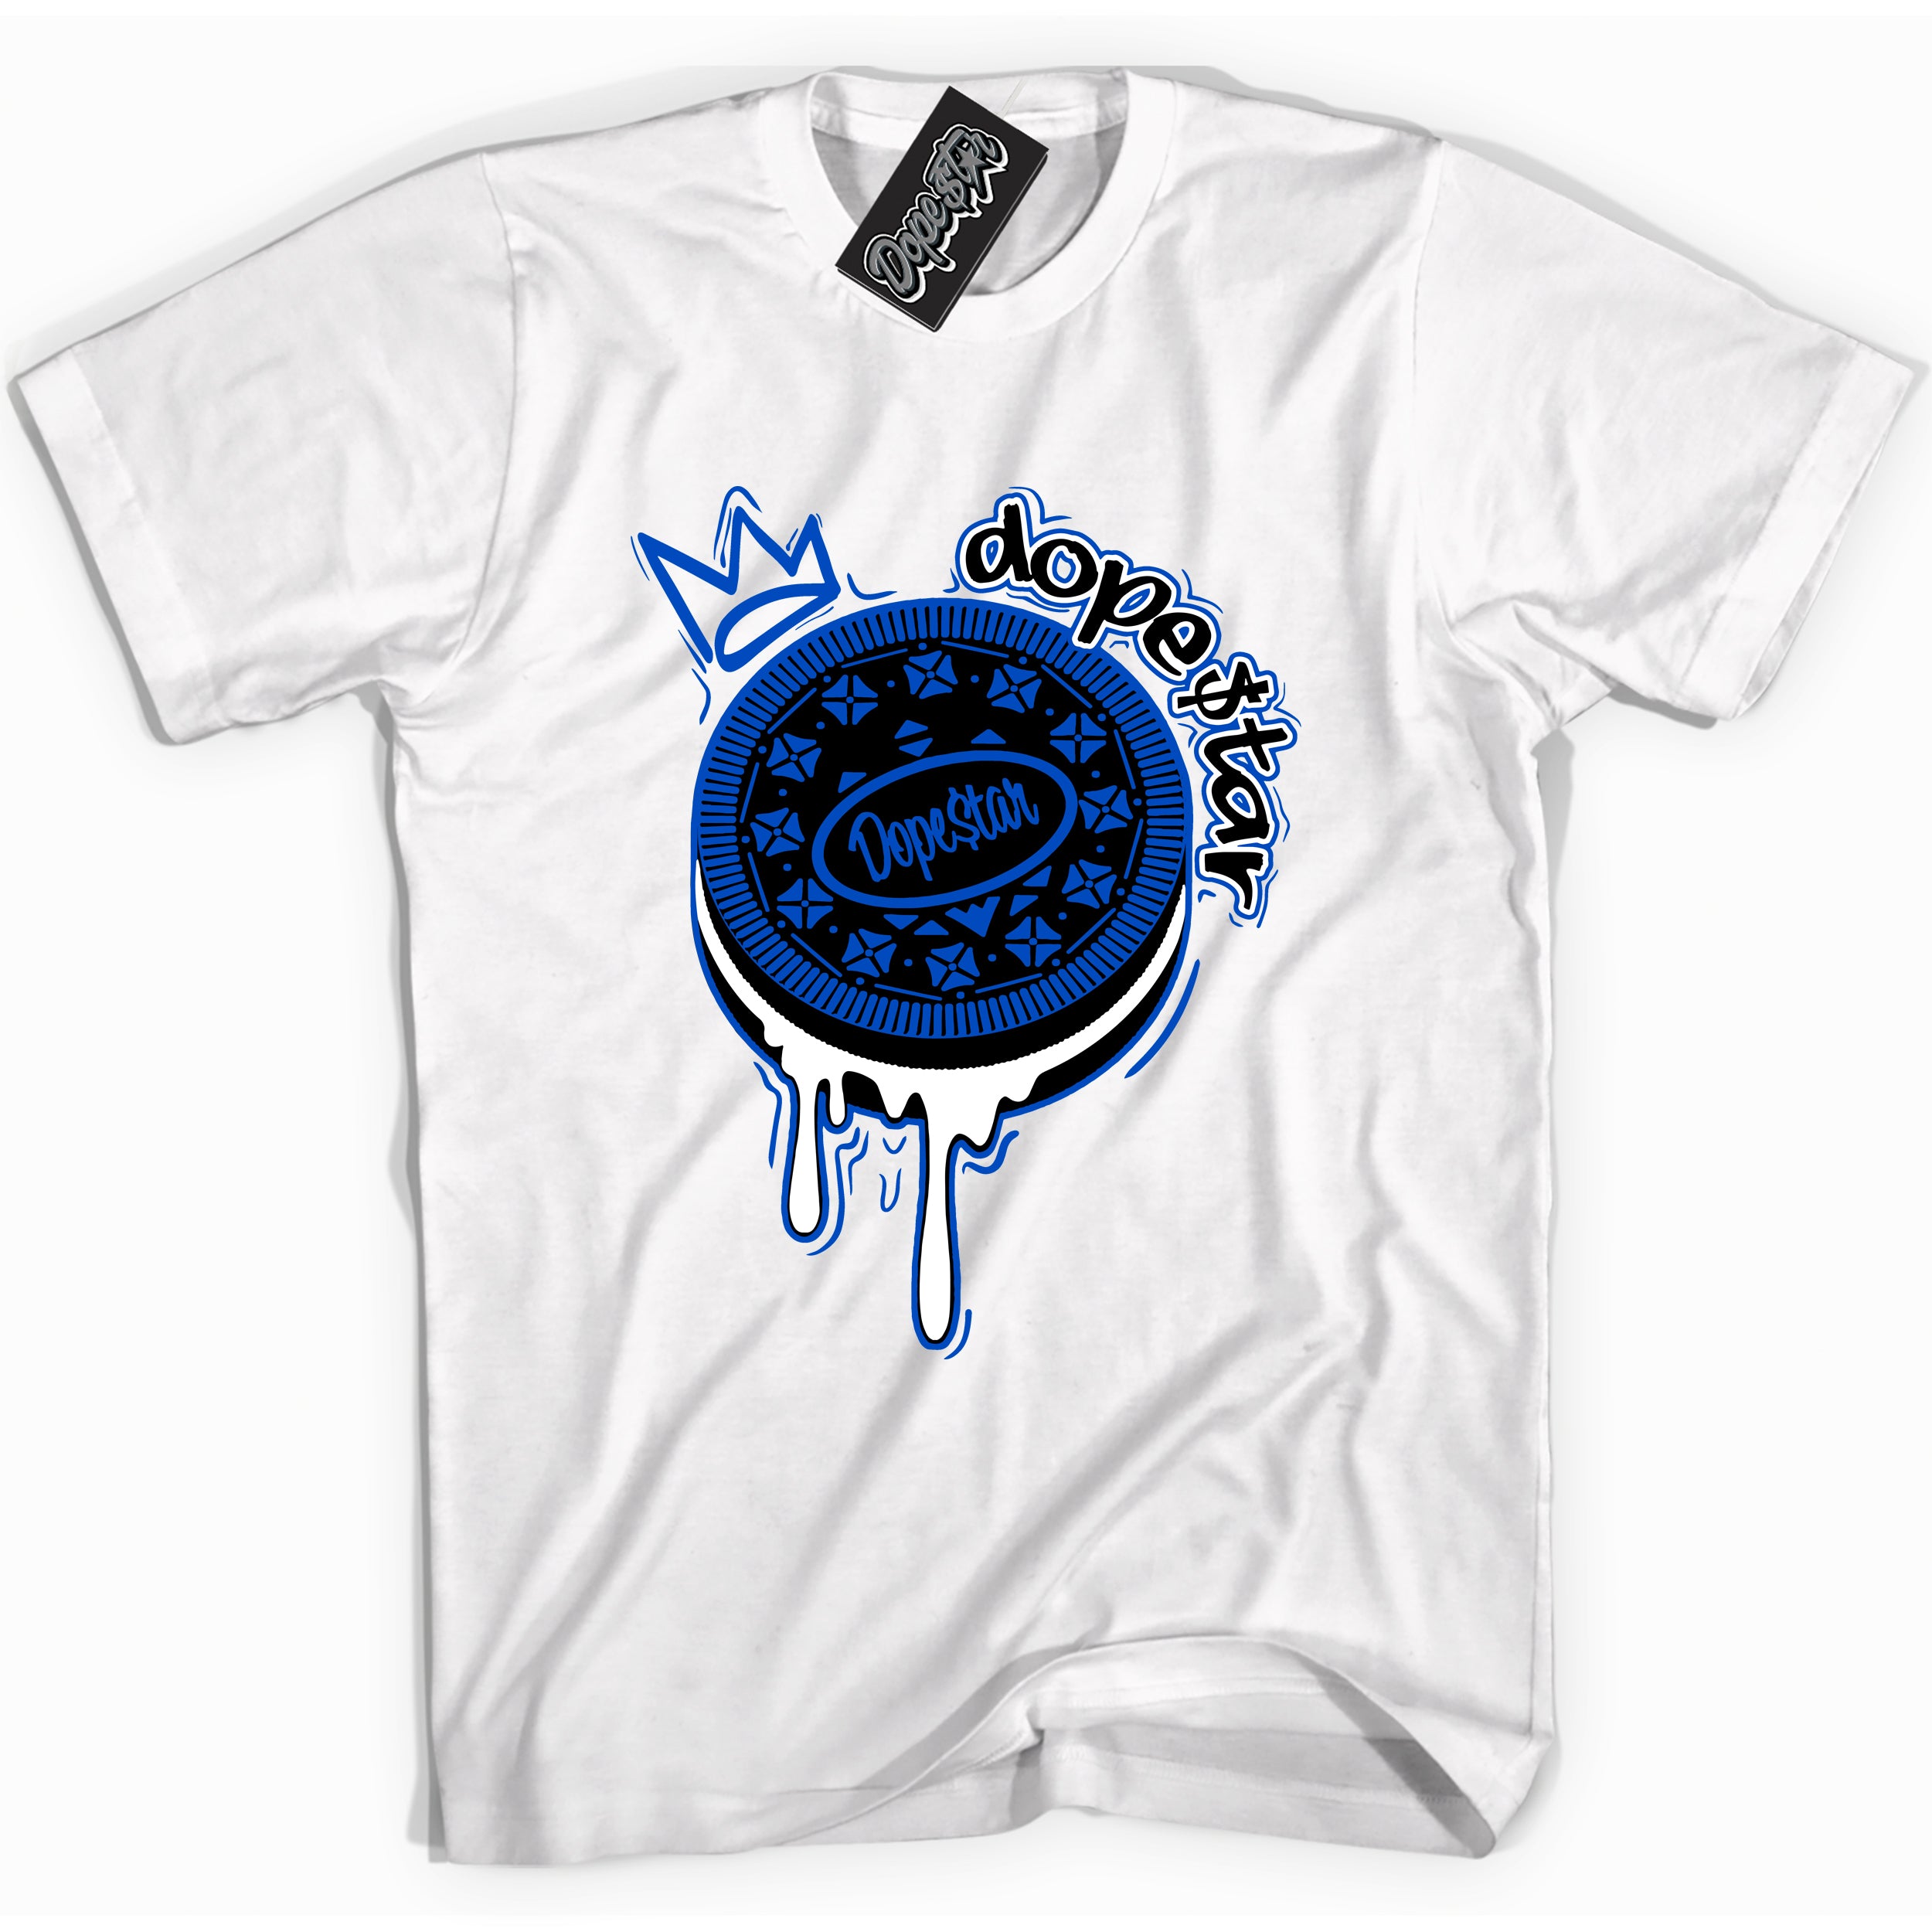 Cool White graphic tee with Oreo DS print, that perfectly matches OG Royal Reimagined 1s sneakers 